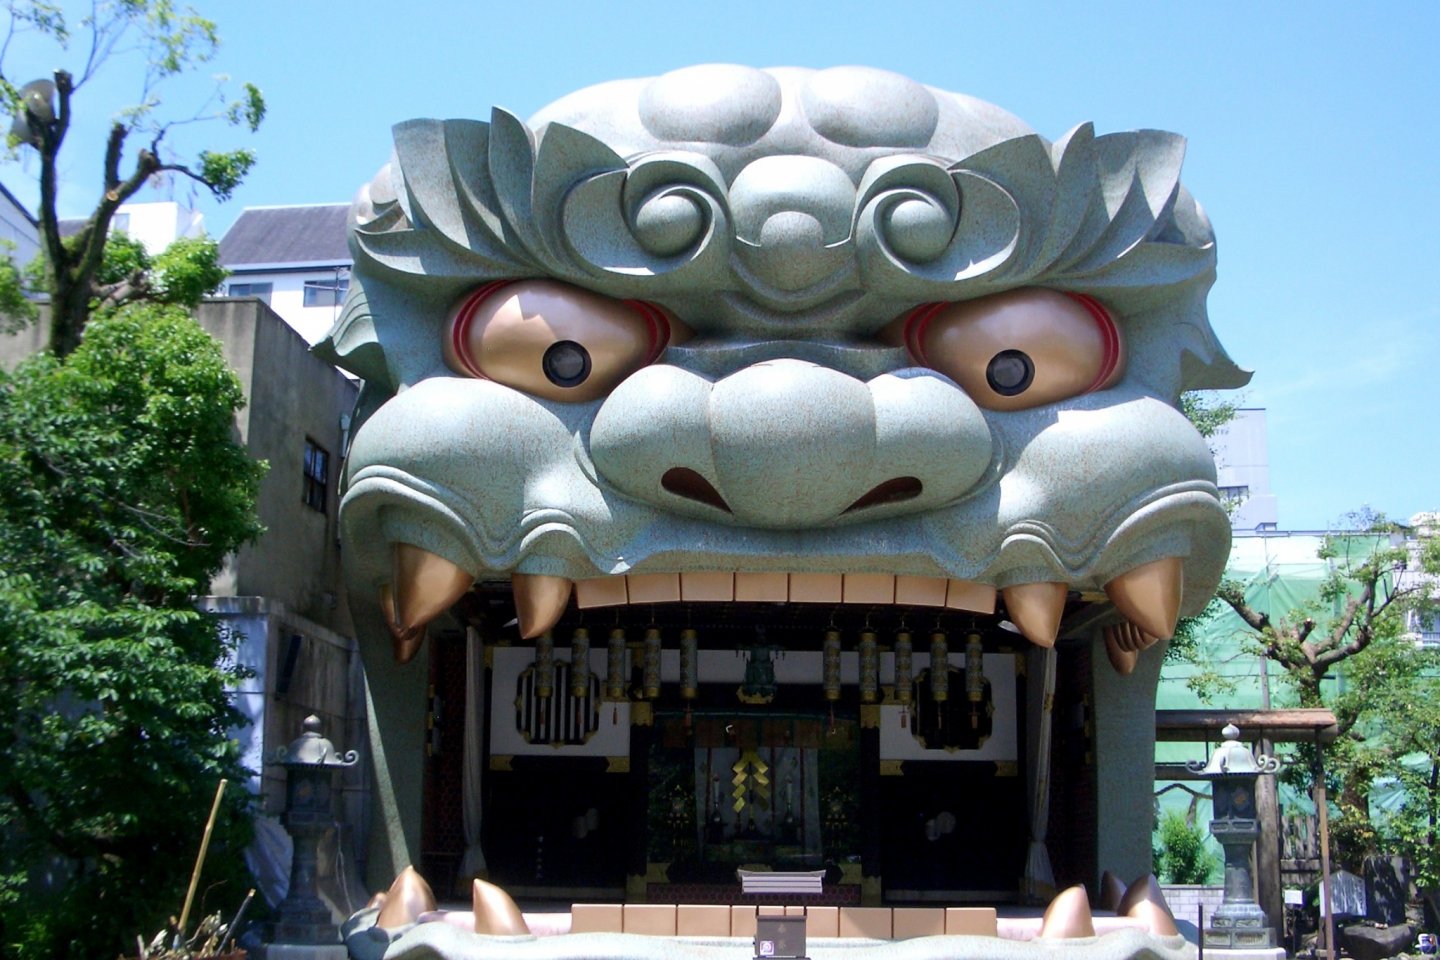 With a giant lion, this must be one of the coolest and funkiest shrines in all of Japan, if not, at least one of the top 10 shrines to visit.